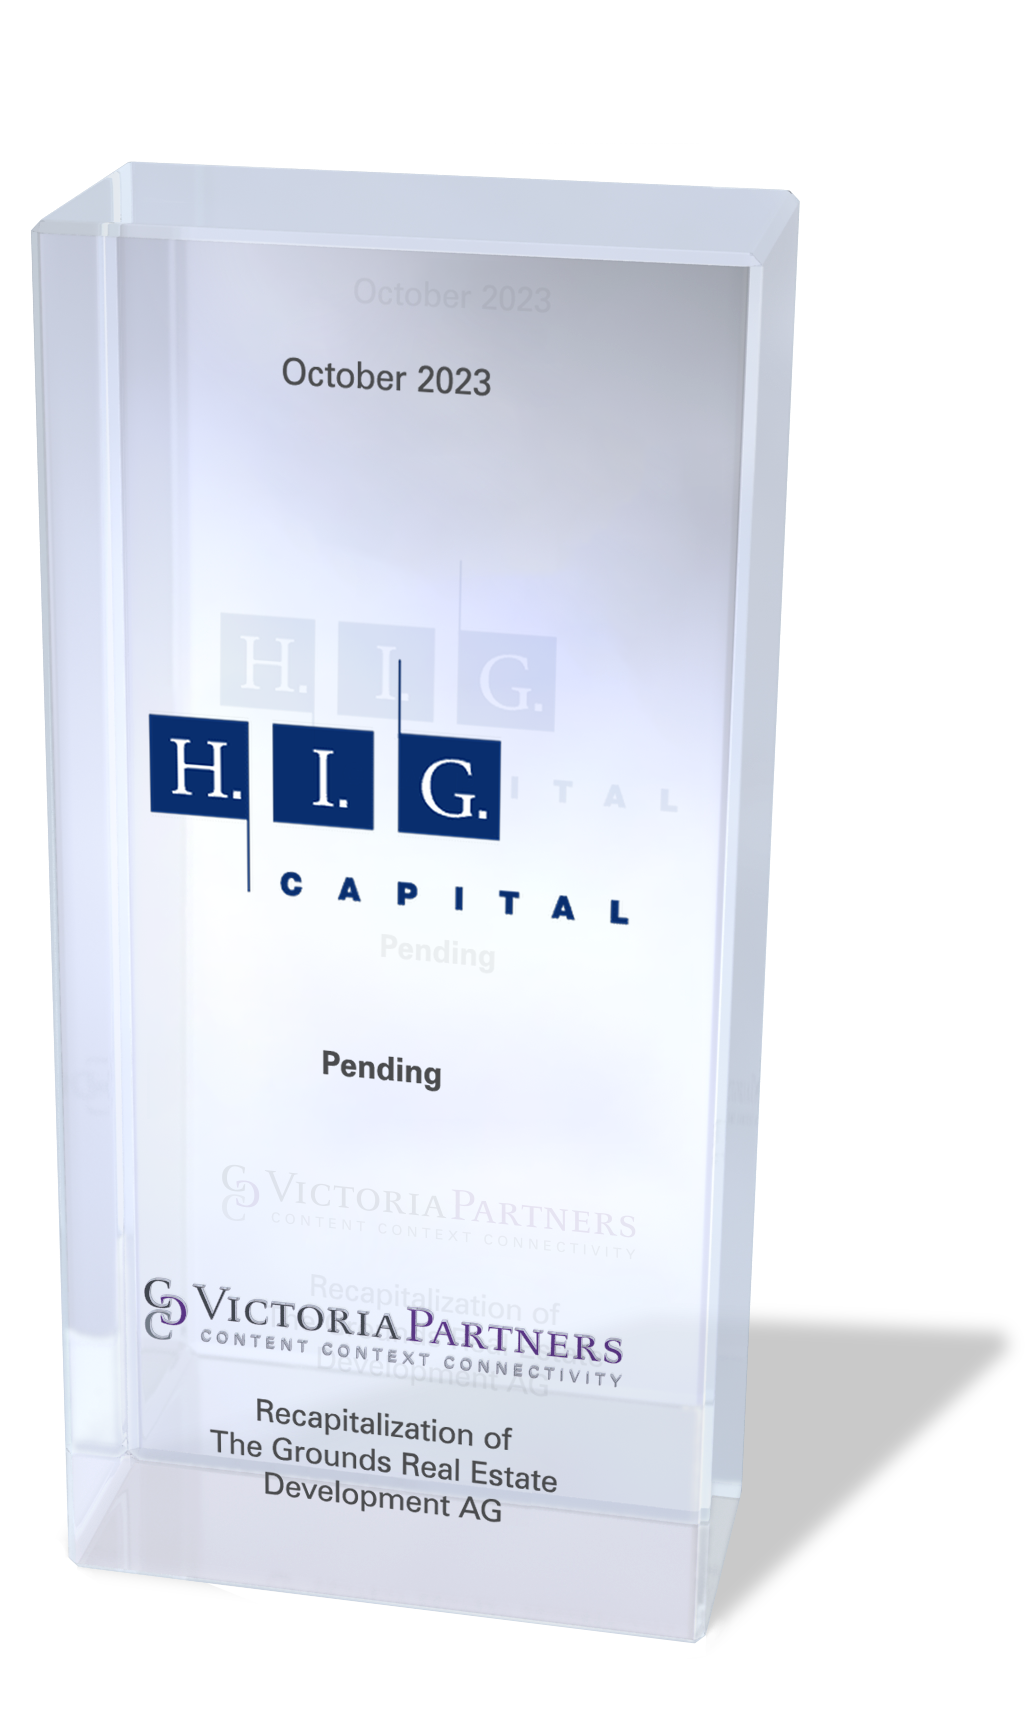 VICTORIAPARTNERS - Recapitalization of The Grounds Real Estate Development AG - October 2023